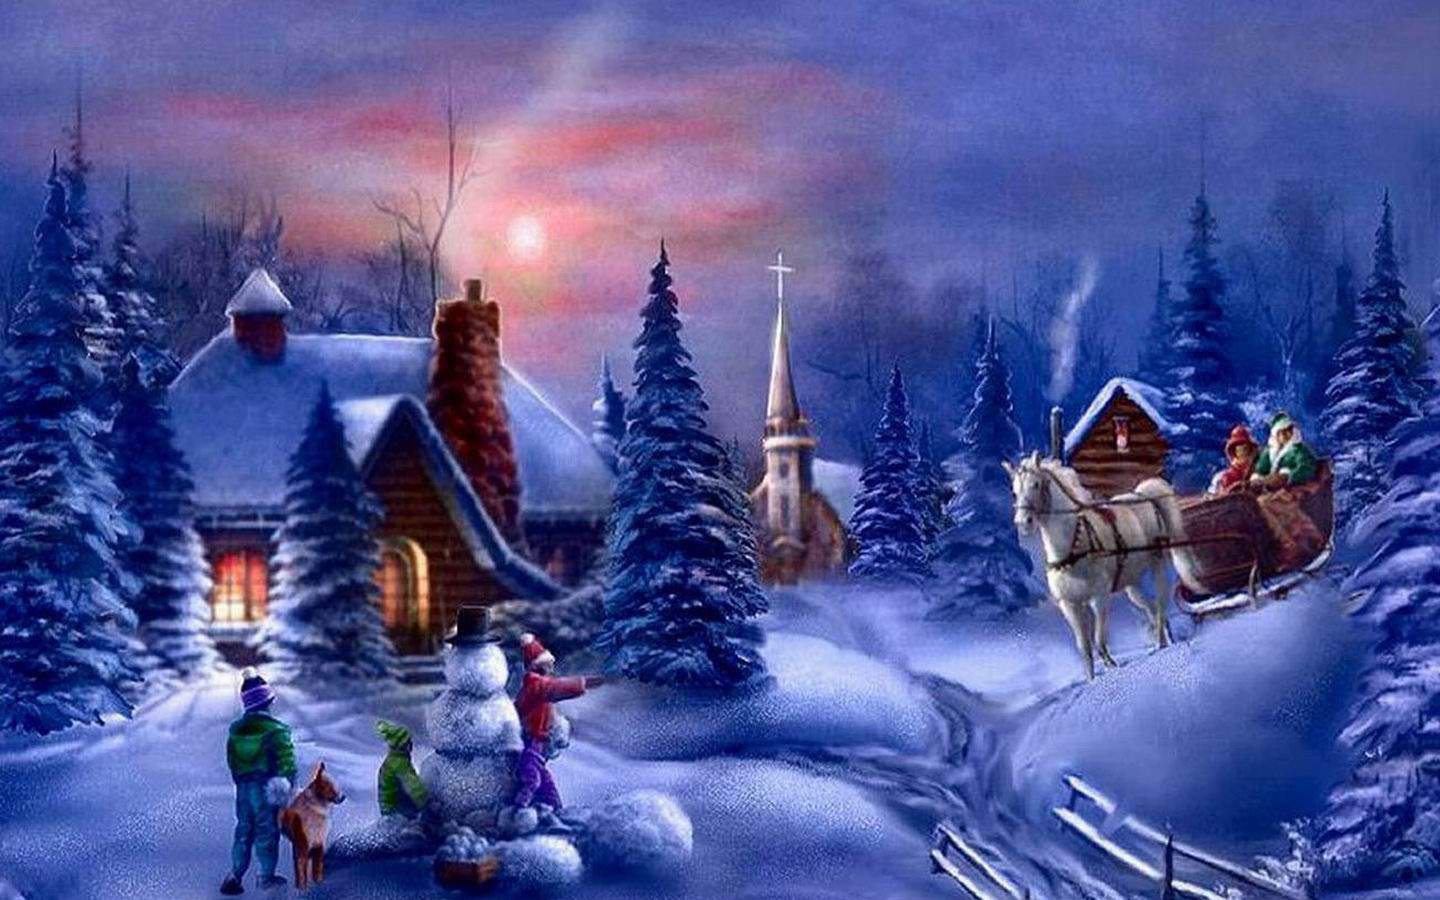  wallpaper backgrounds PC background wallpaper Pictures of christmas 1440x900